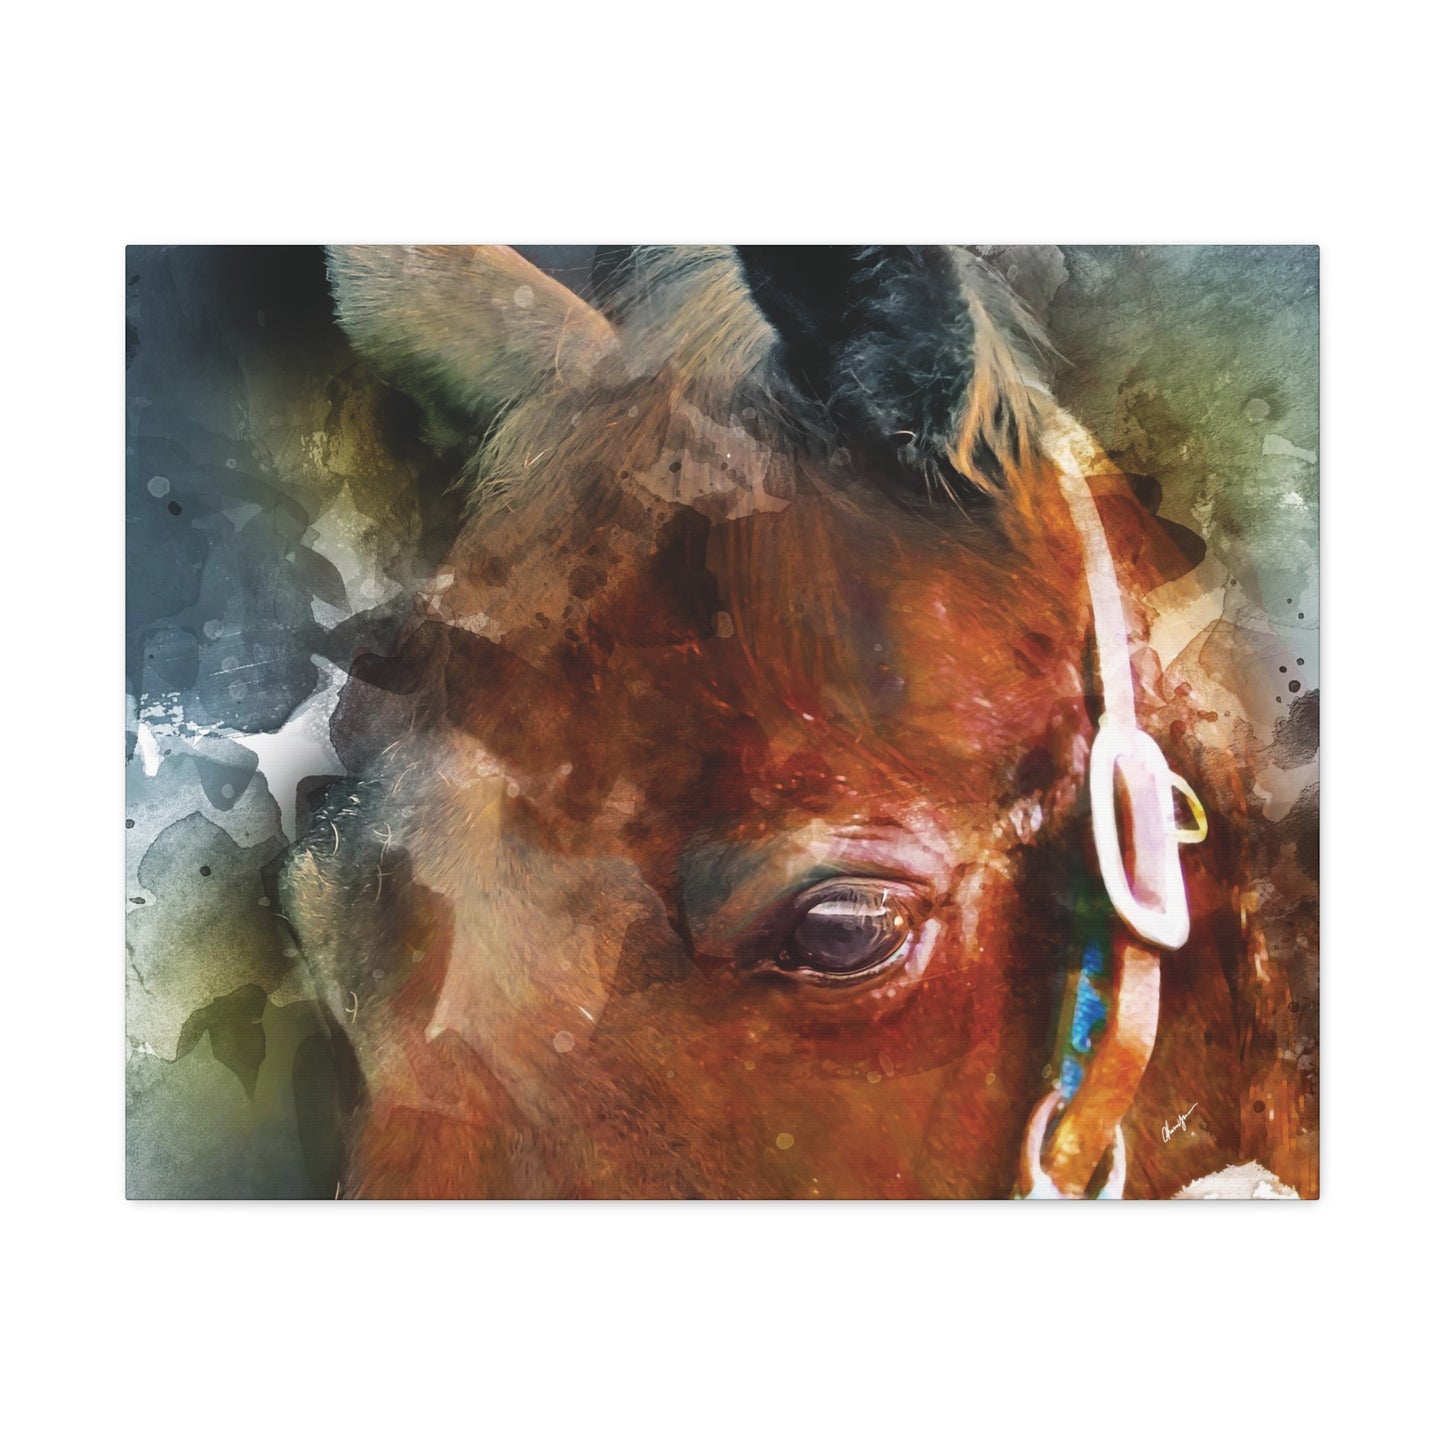 Those Eyes 2 - Standard Unembellished Canvas Gallery Wrap